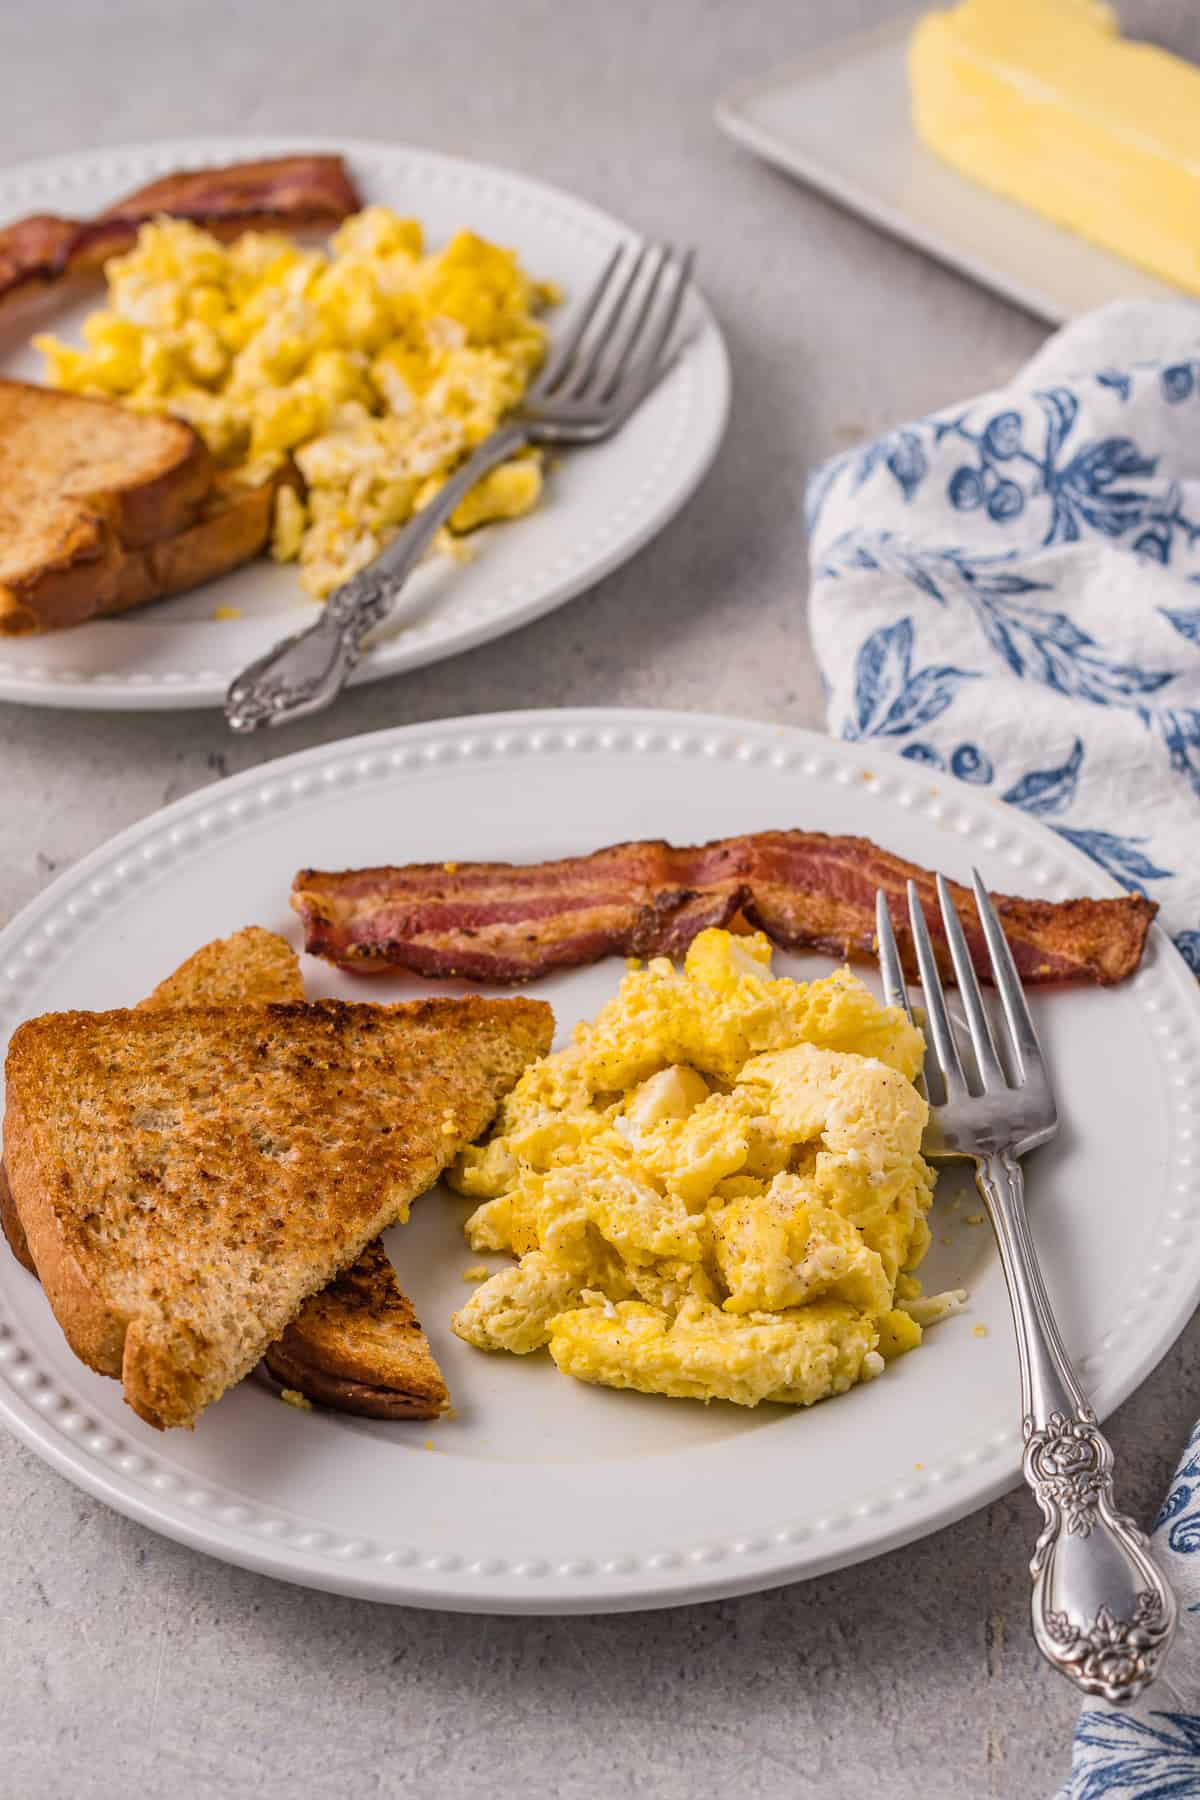 Scrambled eggs on a plate with bacon and toast.